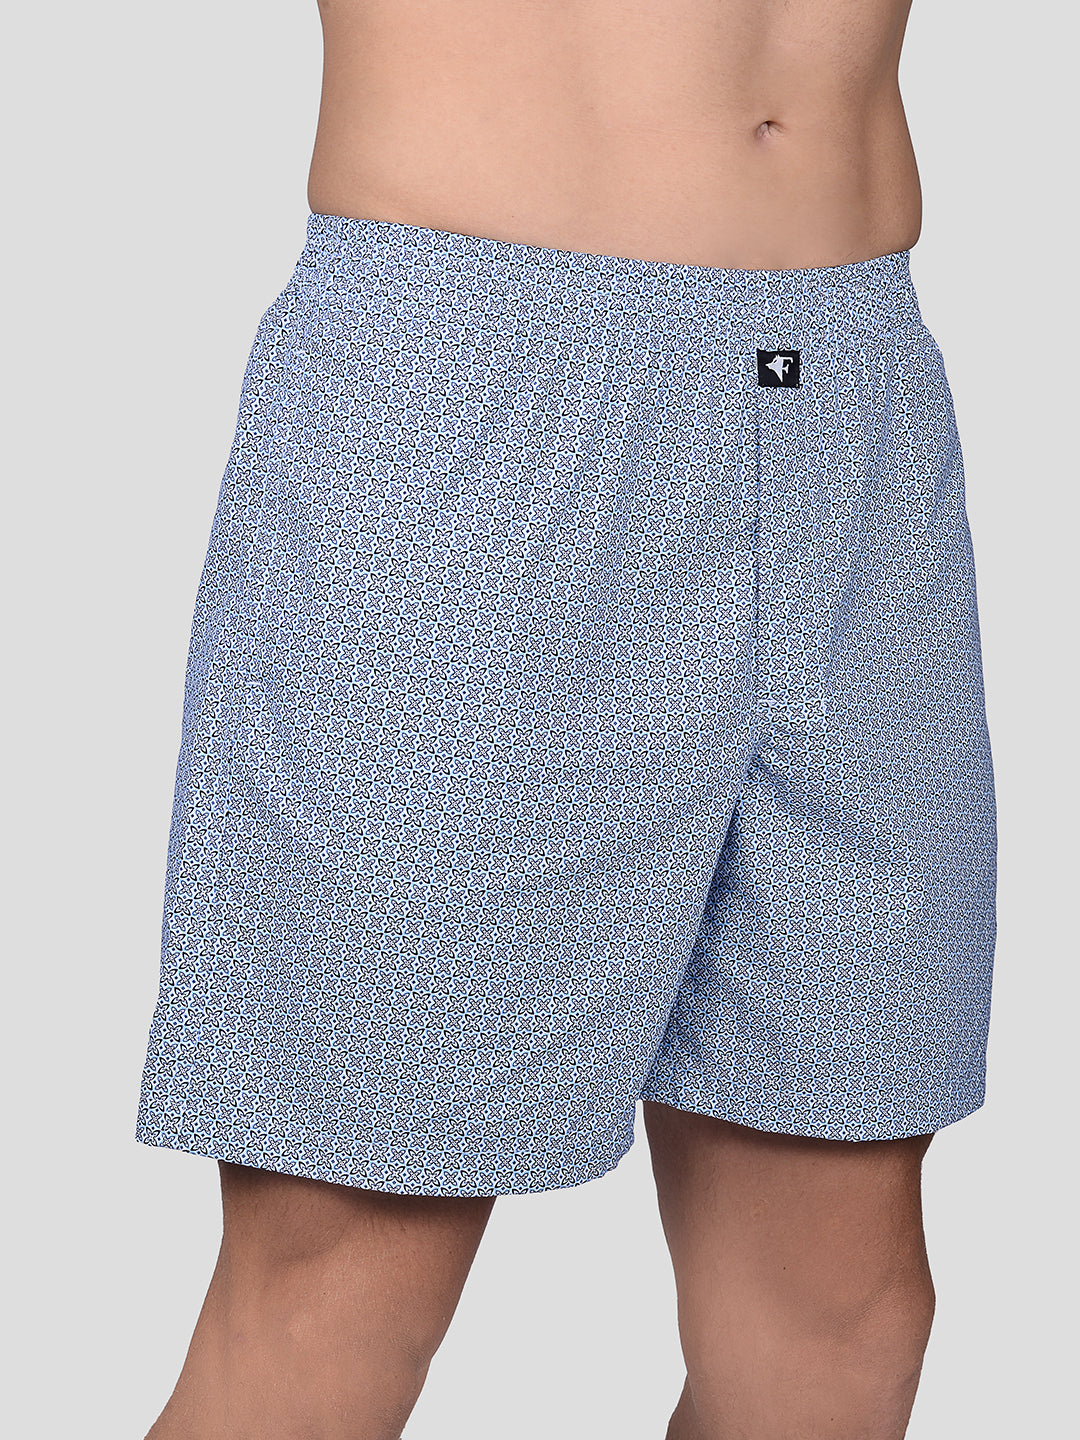 Frenchie Men's Boxer Printed Shorts BR (Assorted)